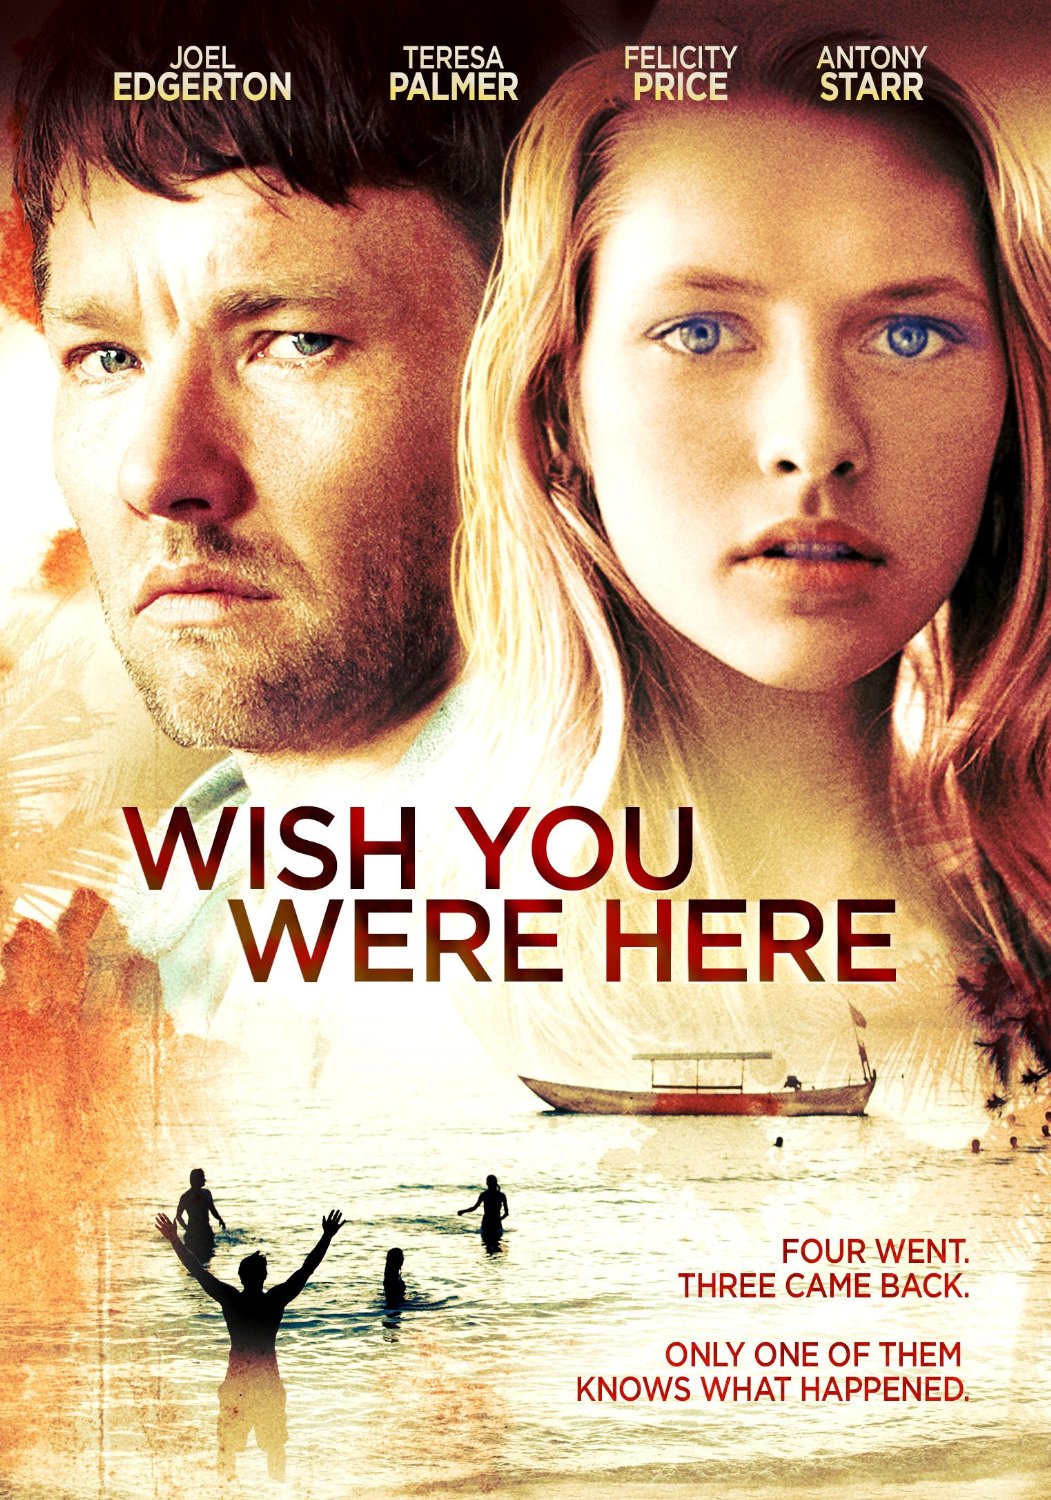 DVD Reviews: Wish You Were Here